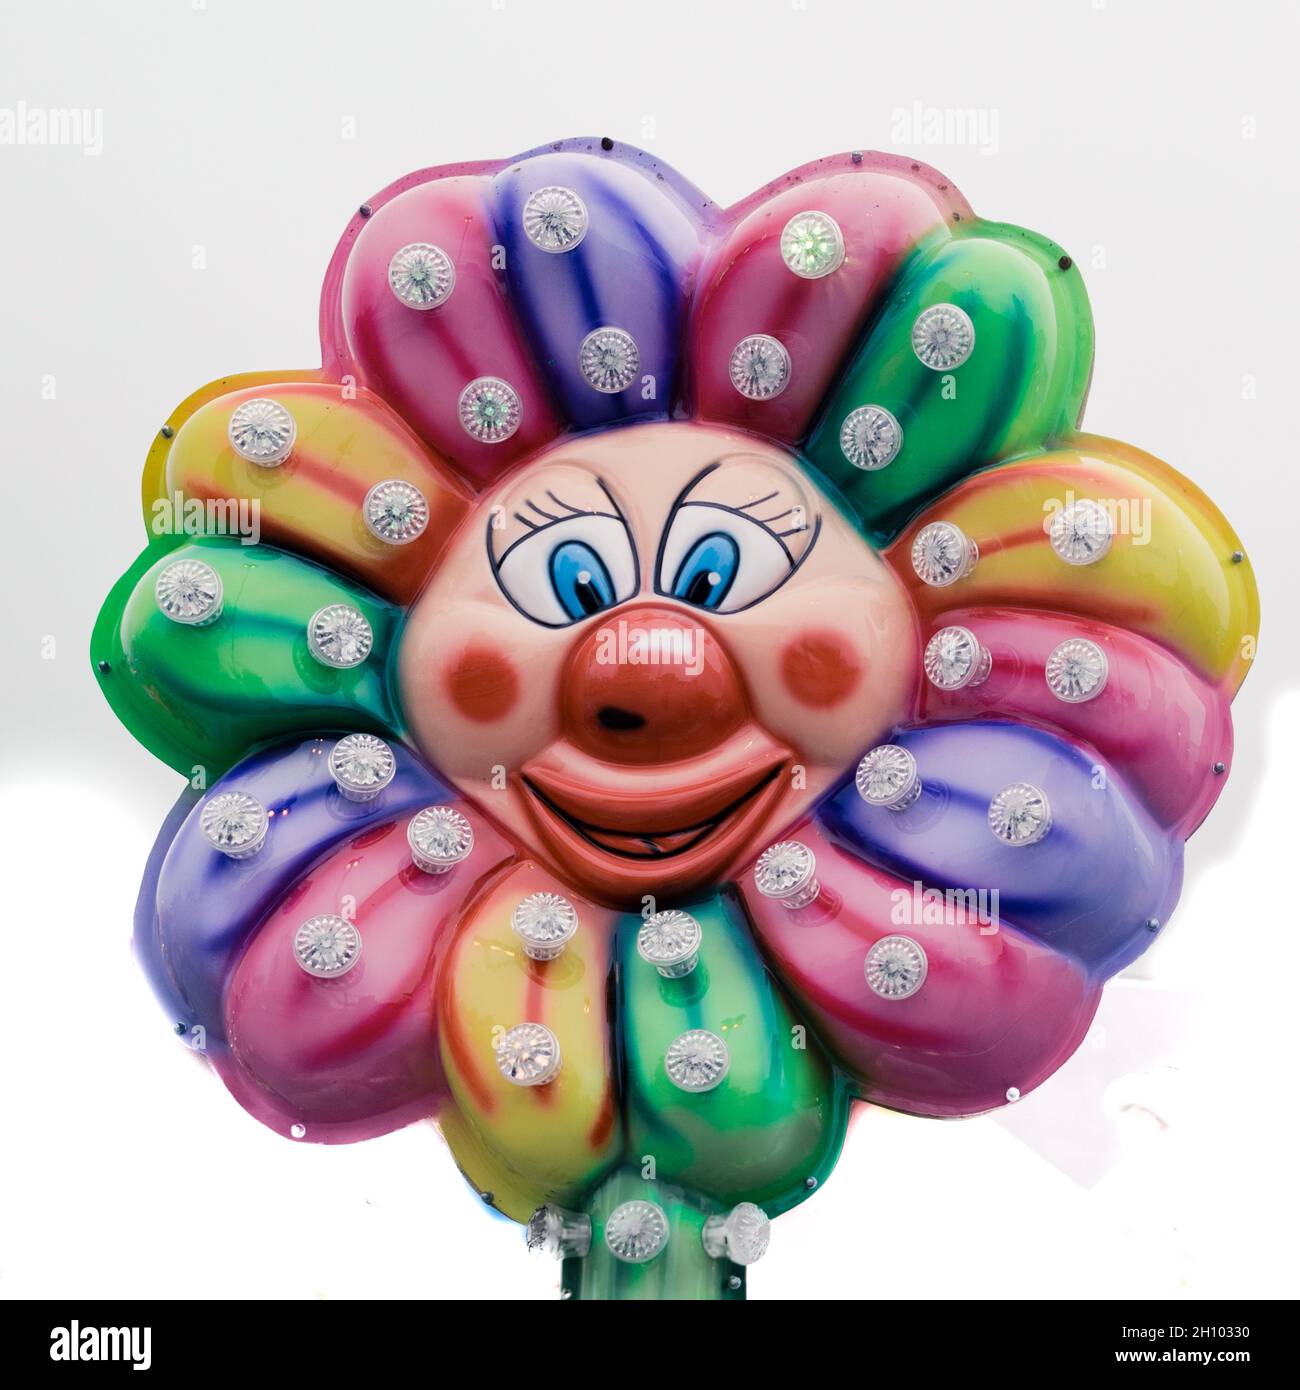 Clown face with petals Stock Photo